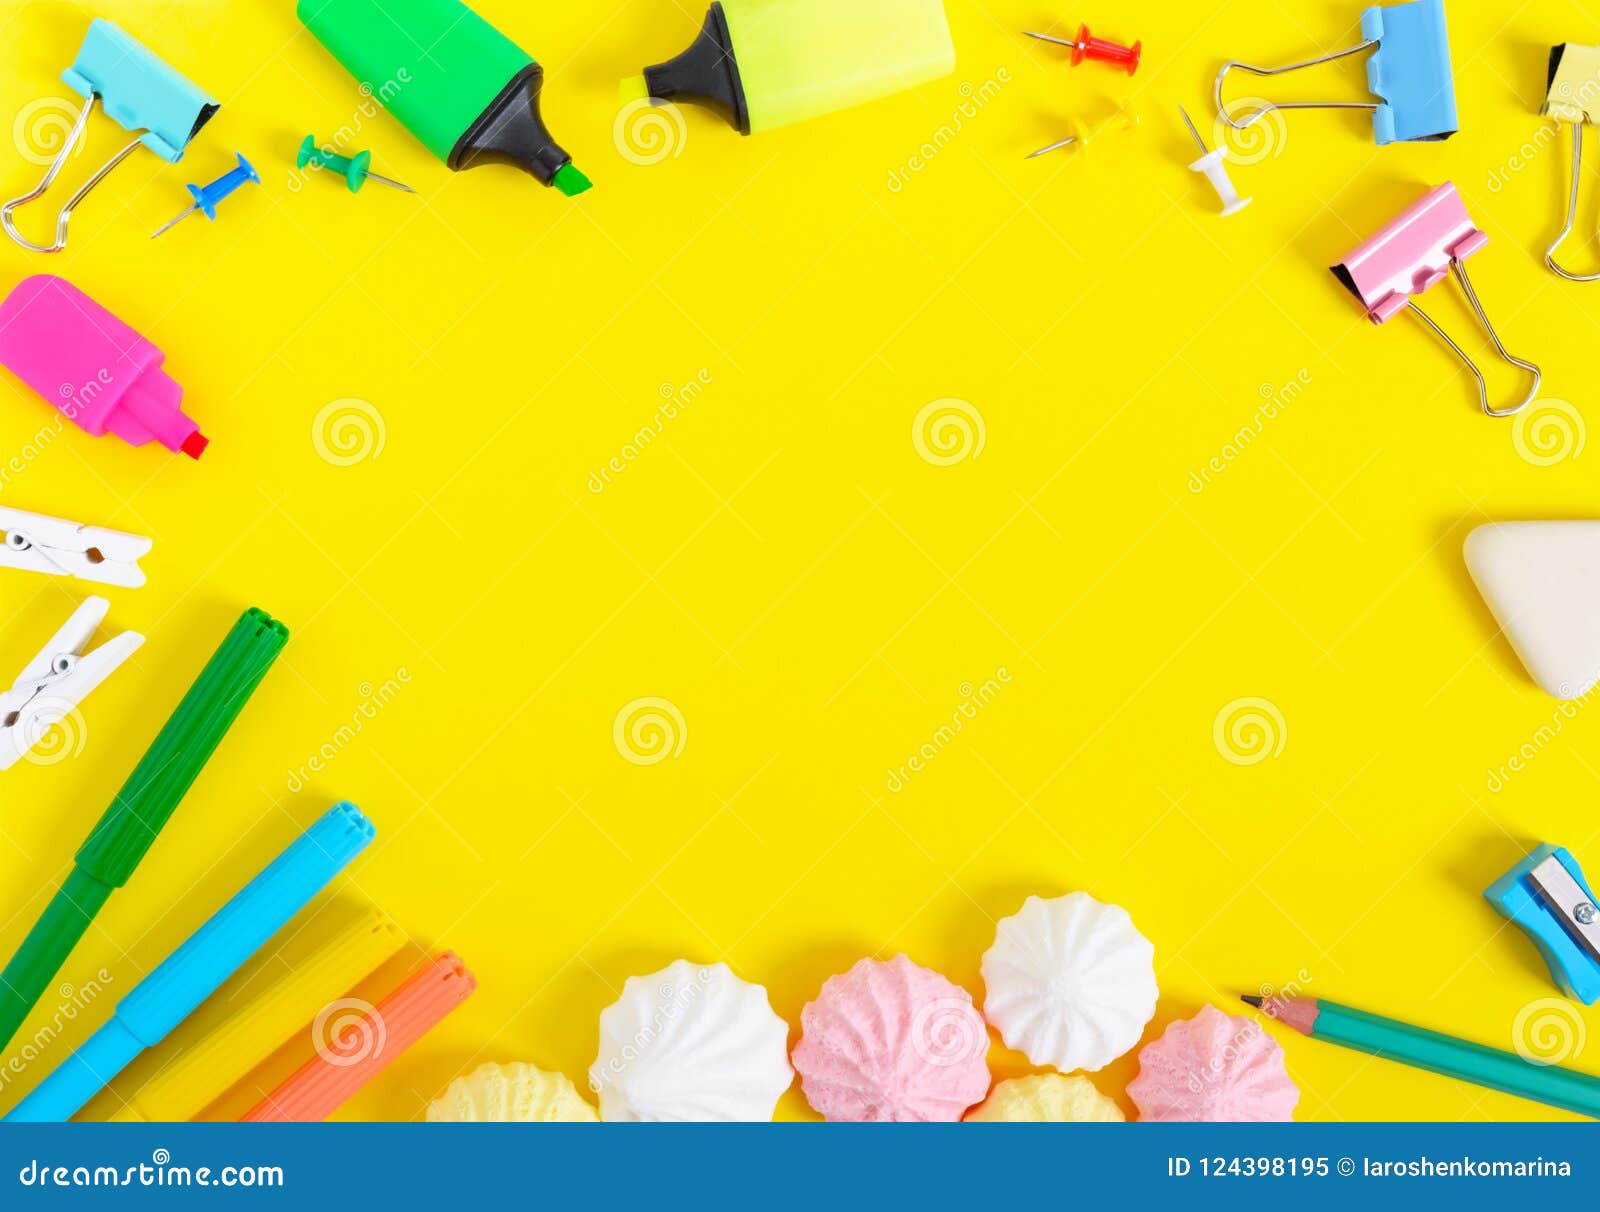 School Accessories on a Yellow Background. Back To School Concept Stock  Image - Image of background, paper: 124398195